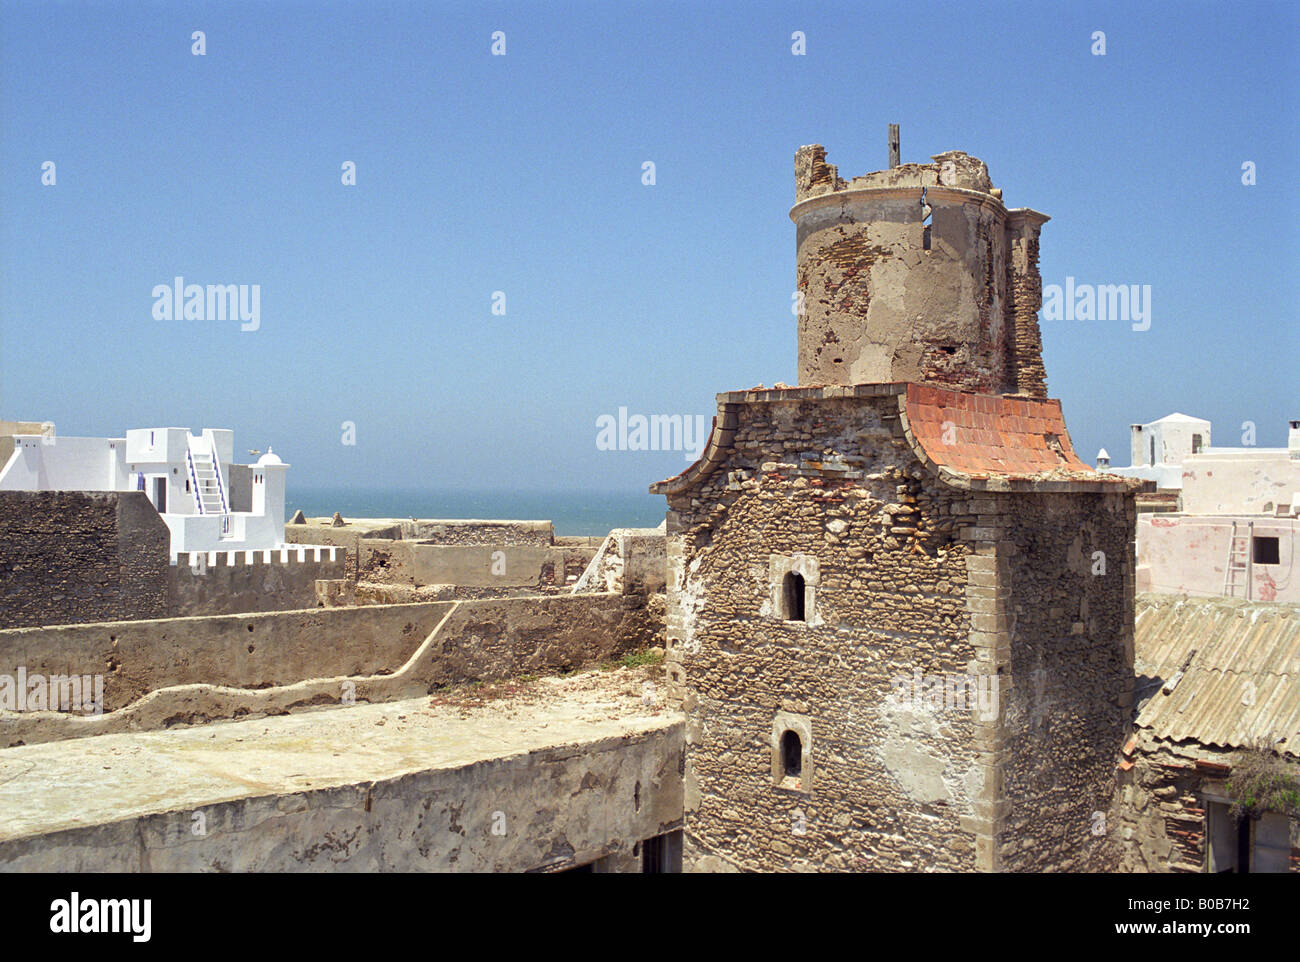 The spectacular view from the roof of The Hotel Cap Sim in Essouira, Morocco Stock Photo